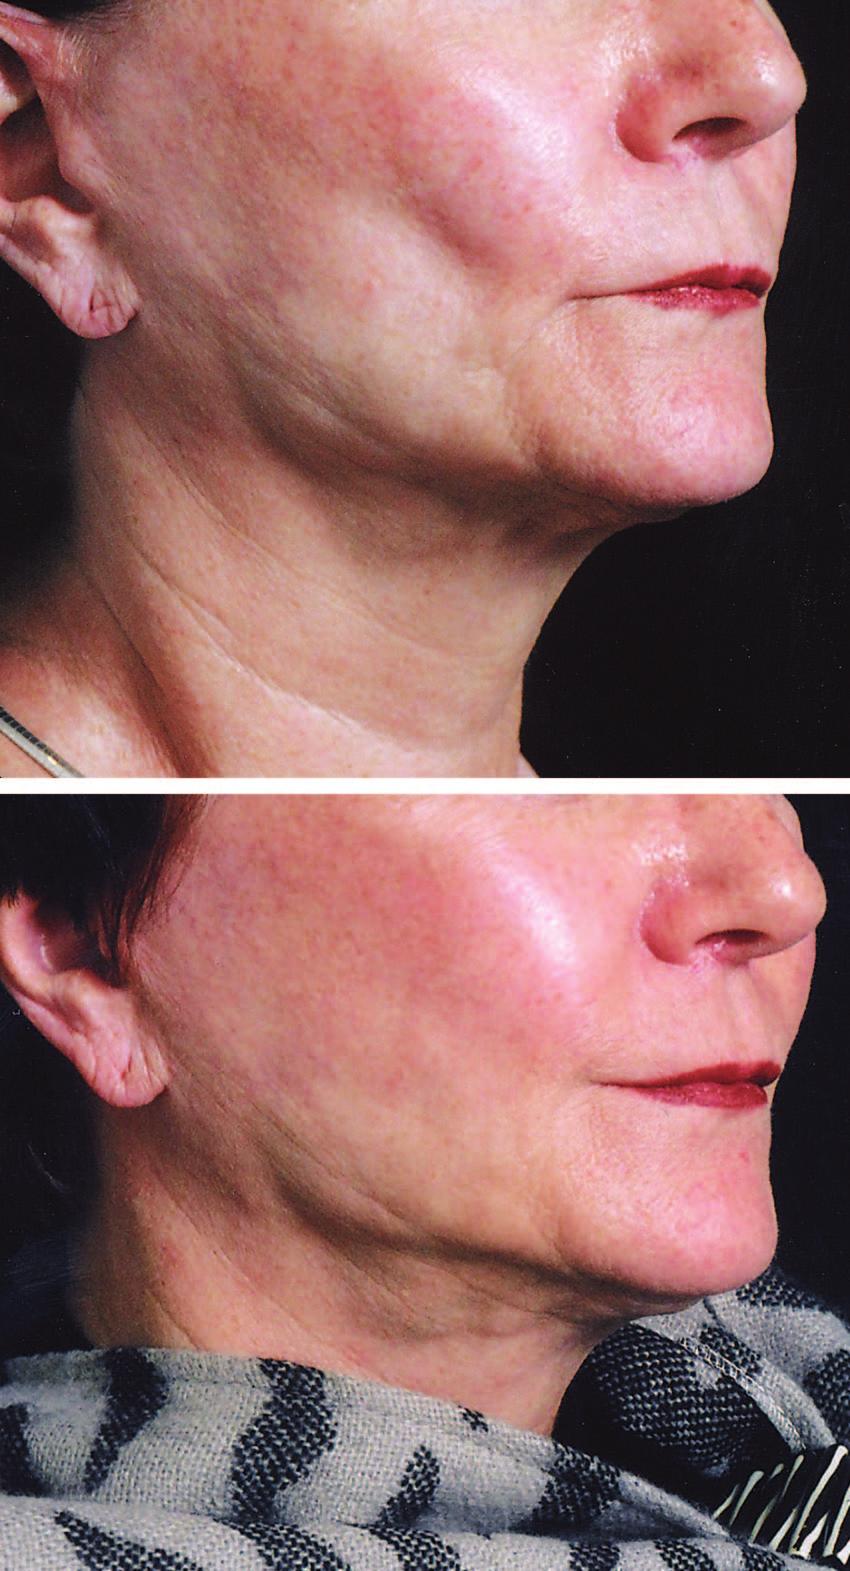 Volume 122, Number 5 Cross-Cheek Depression Fig. 9. A 65-year-old woman after face lift surgery. (Above) She has an obvious and abnormal depression in her cheek.